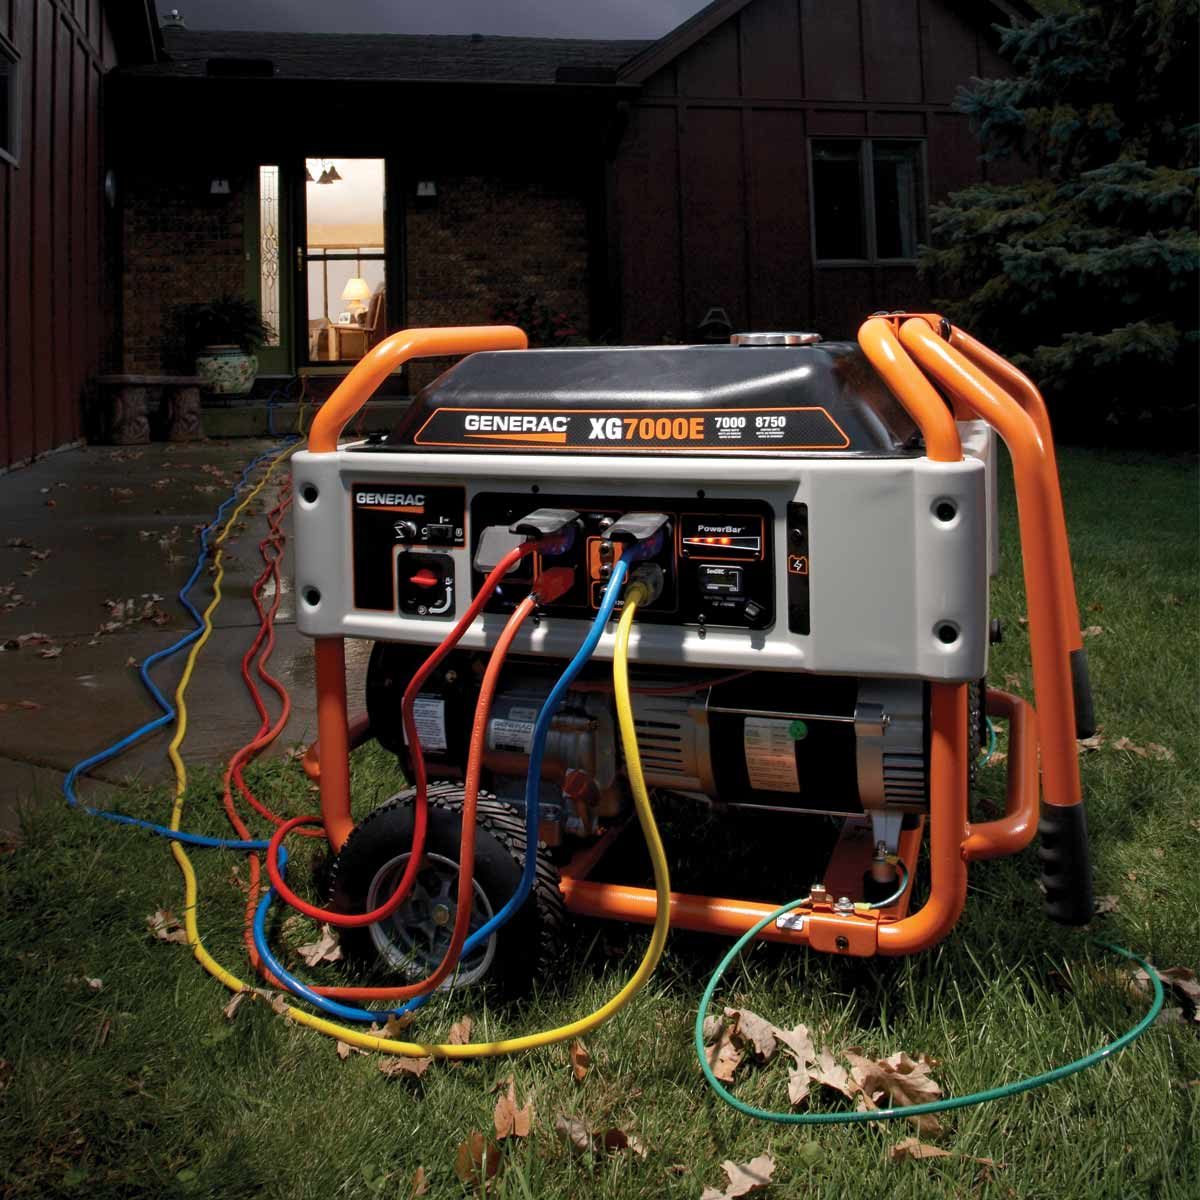 11 Tips for Maintaining Your Emergency Generator